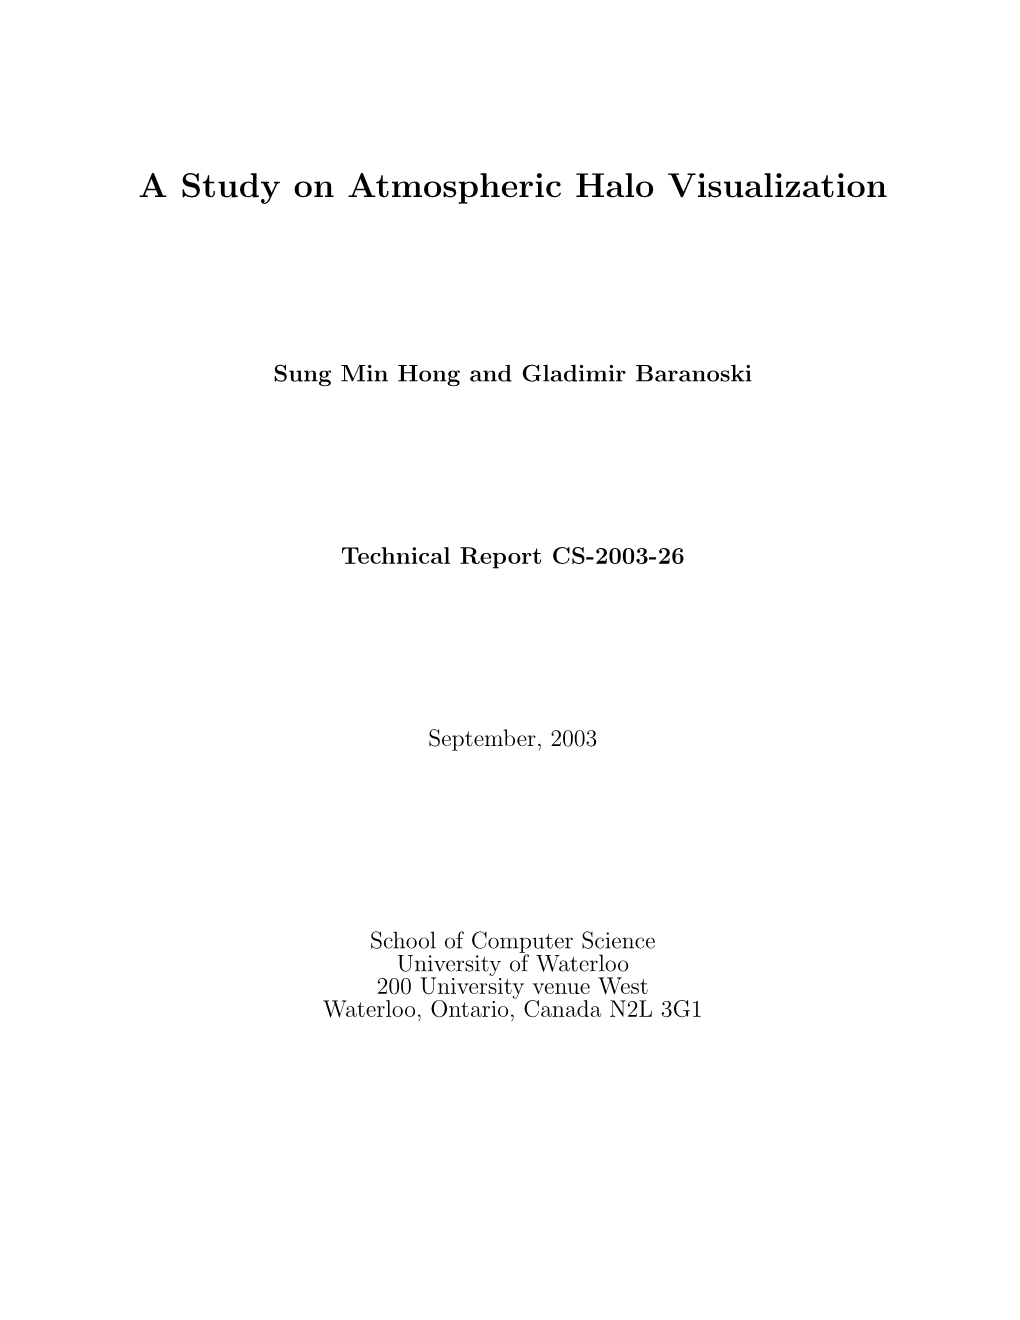 A Study on Atmospheric Halo Visualization